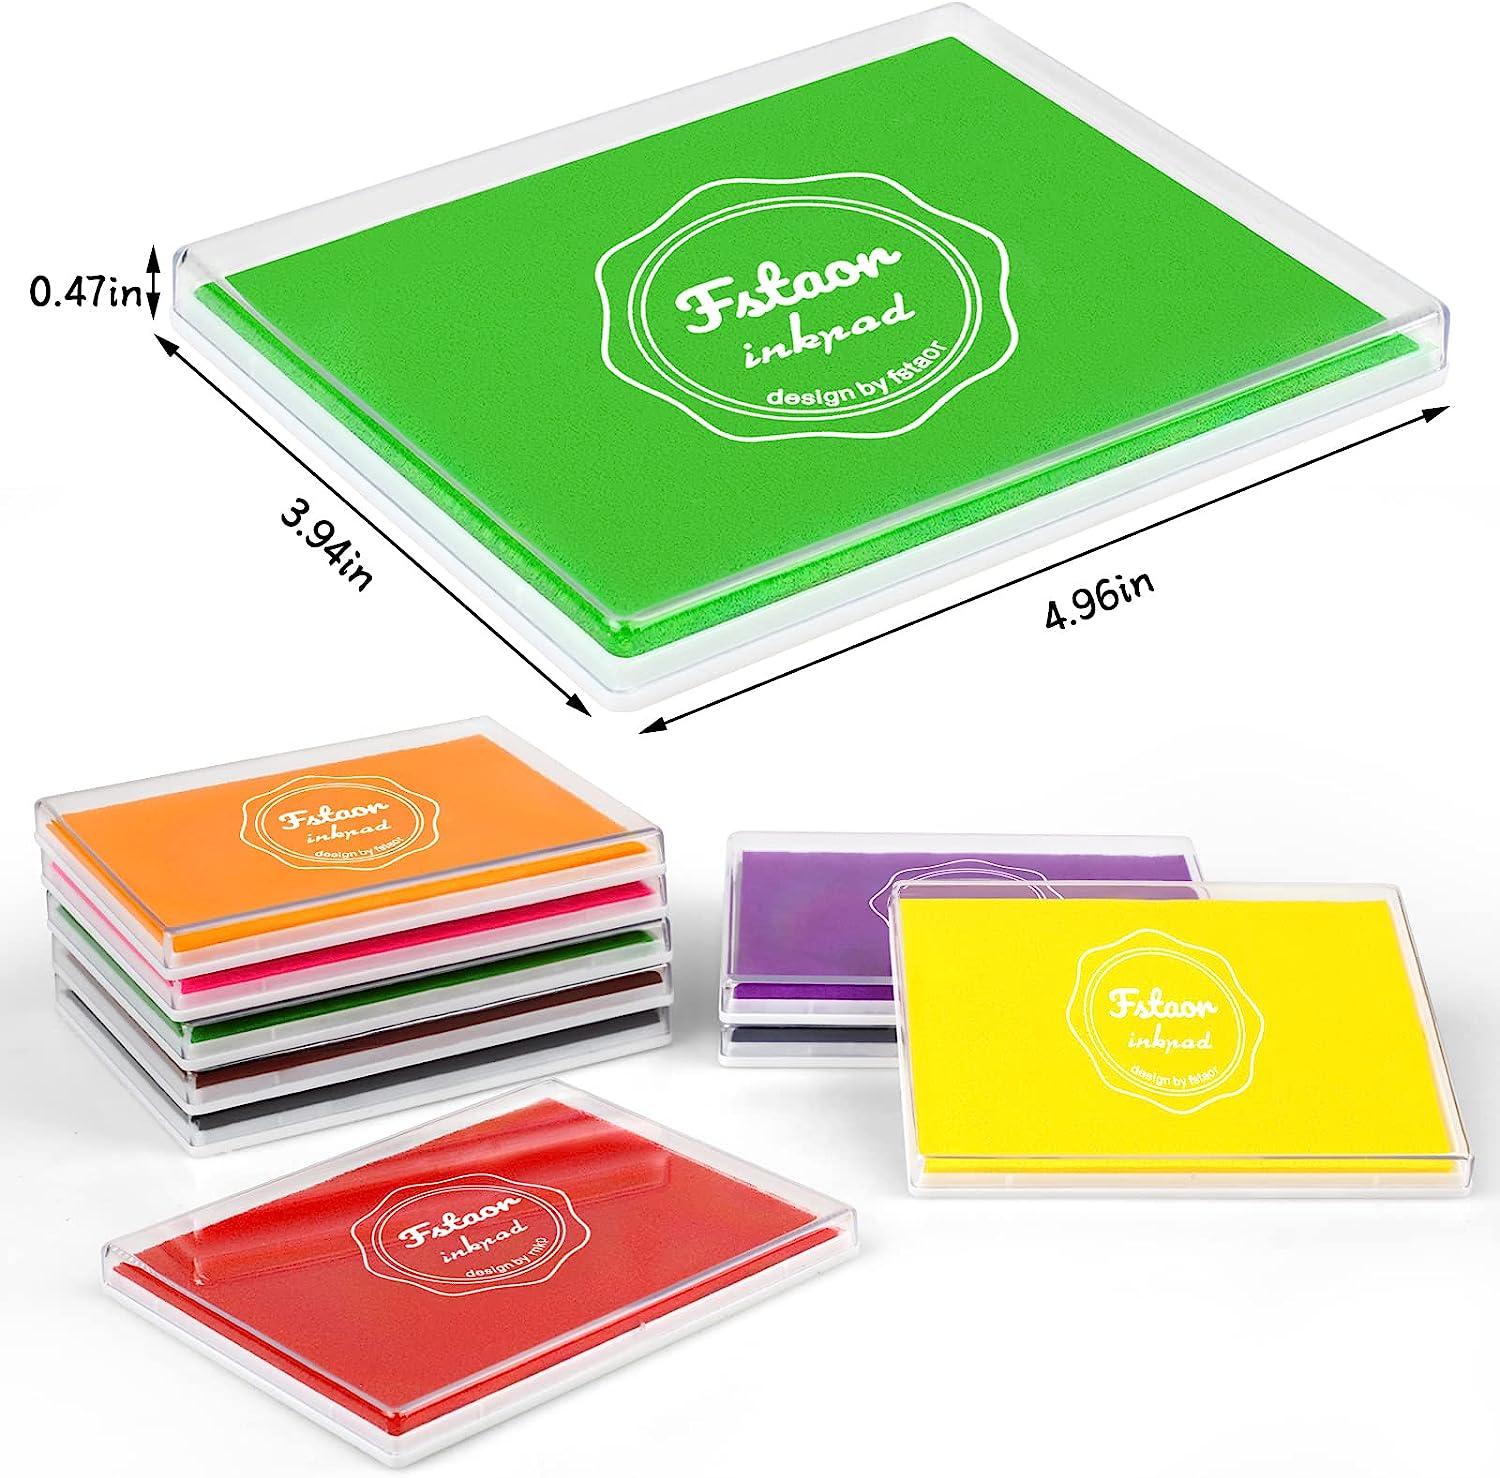 Best Stamp Pad, Ink Pads for Rubber Stamps, Wedding Card, Wedding Invitation, St